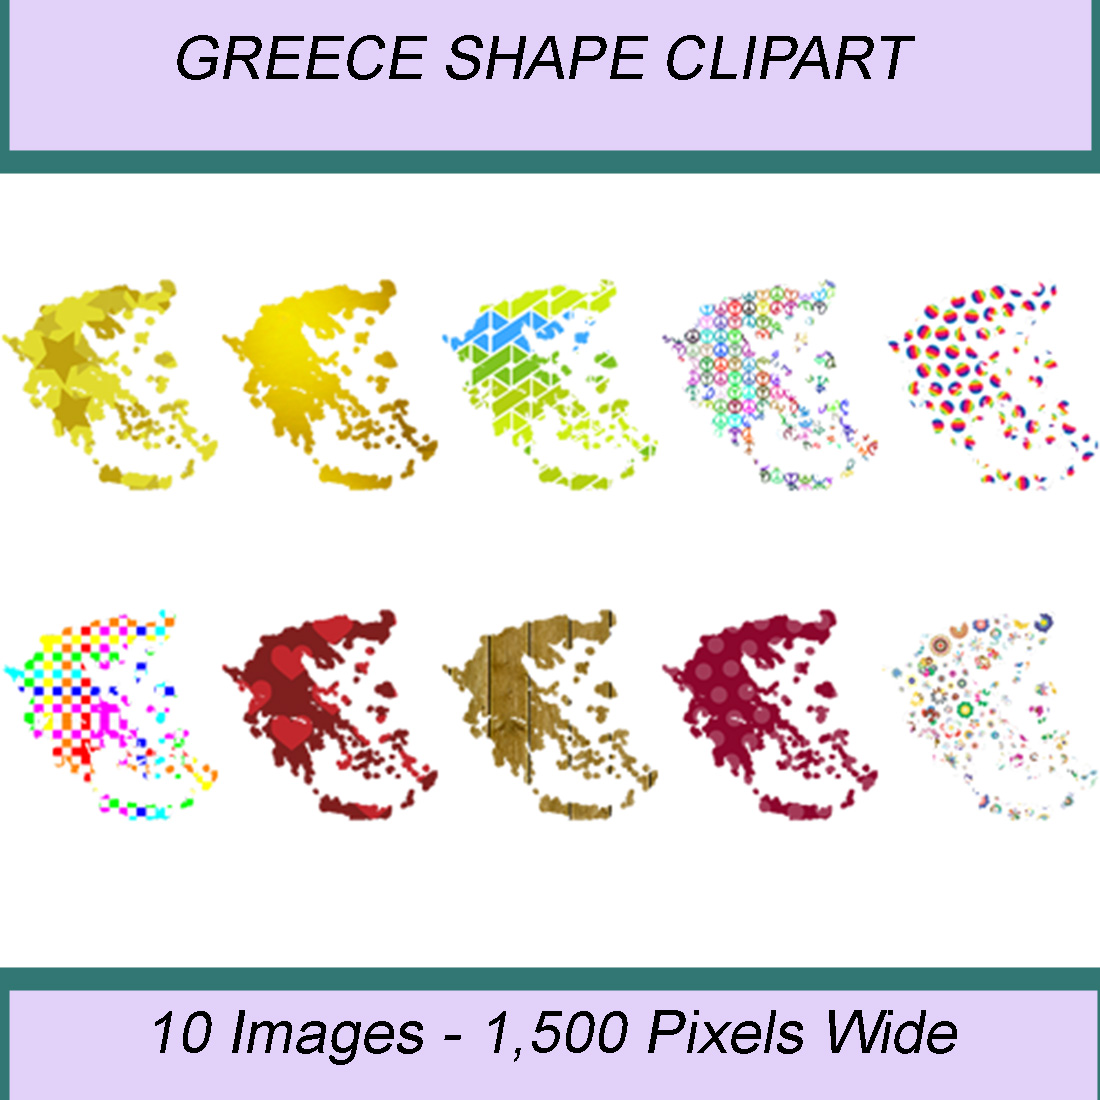 GREECE SHAPE CLIPART ICONS cover image.